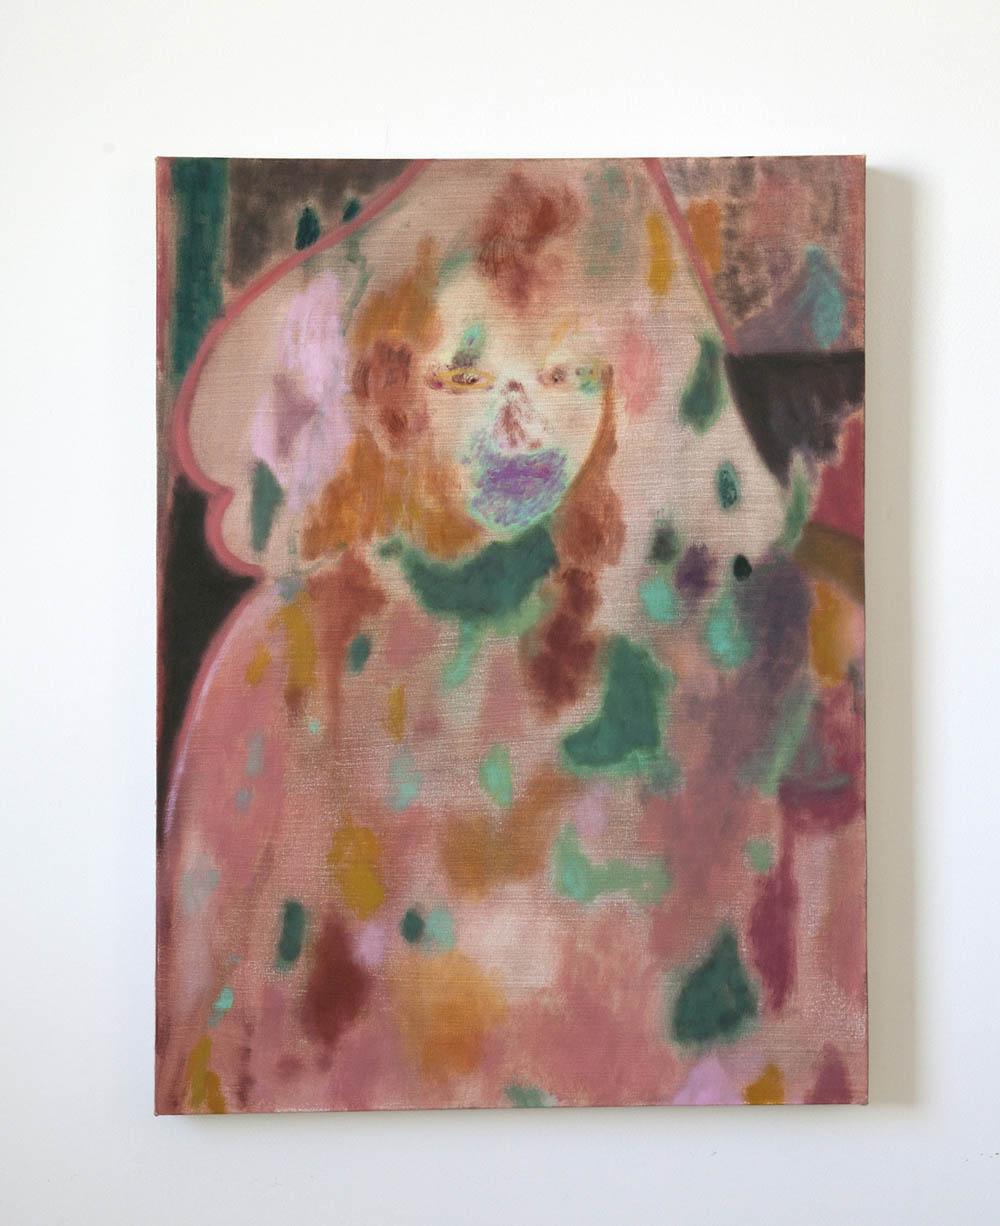 Maja Ruznic, Girl With Hat Carrying a Dead Thing on Her Shoulder (After Matisse's Woman With a Hat), 2018, oil on canvas, 32x24 inches